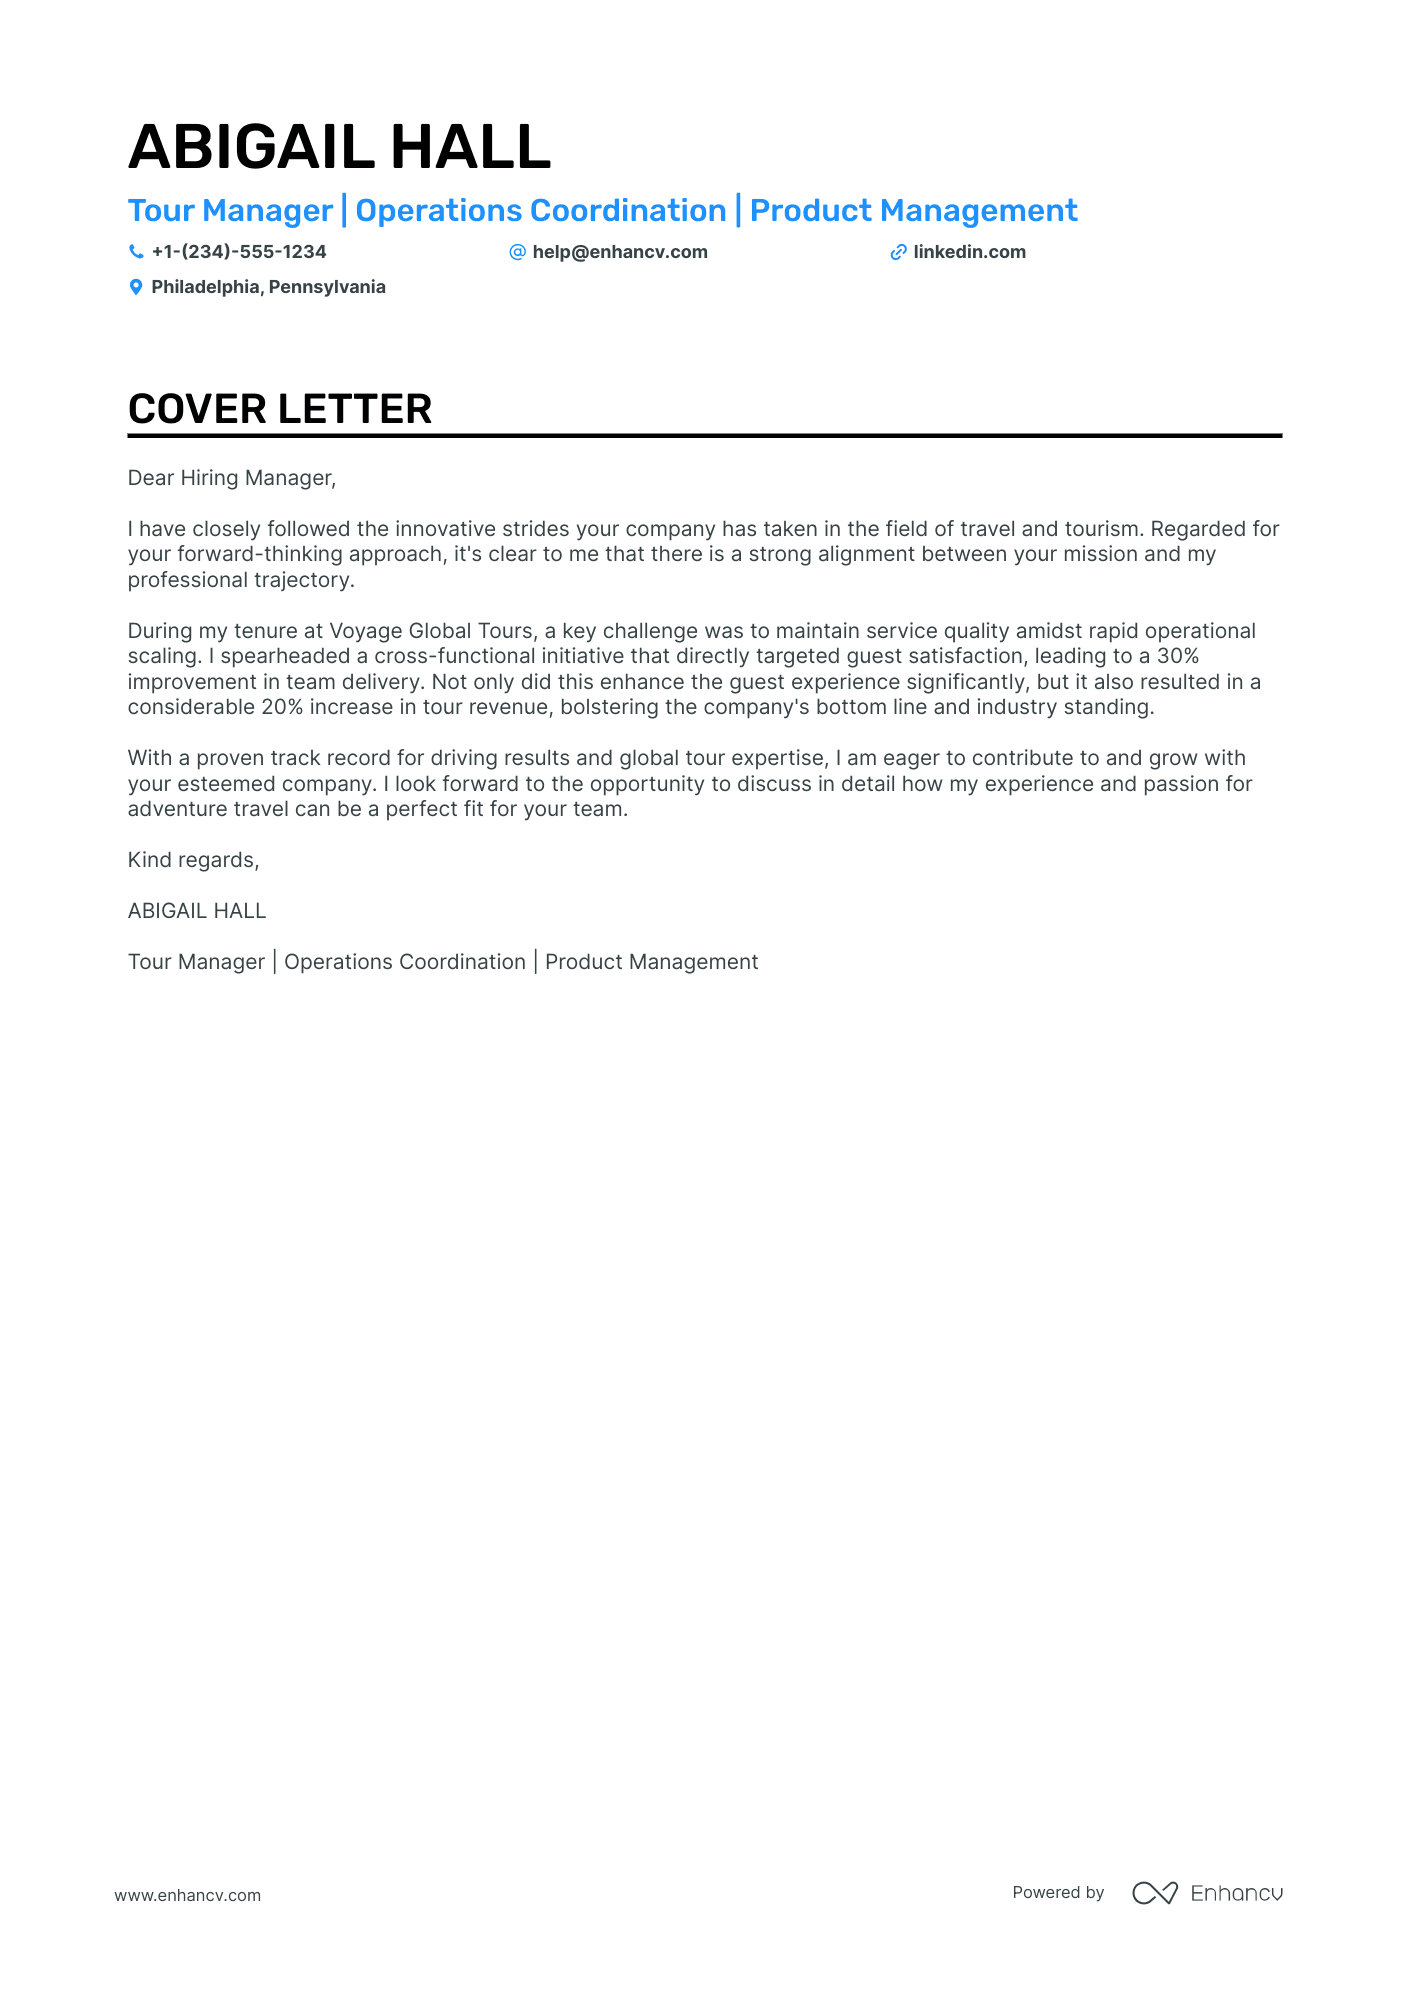 Tour Manager cover letter